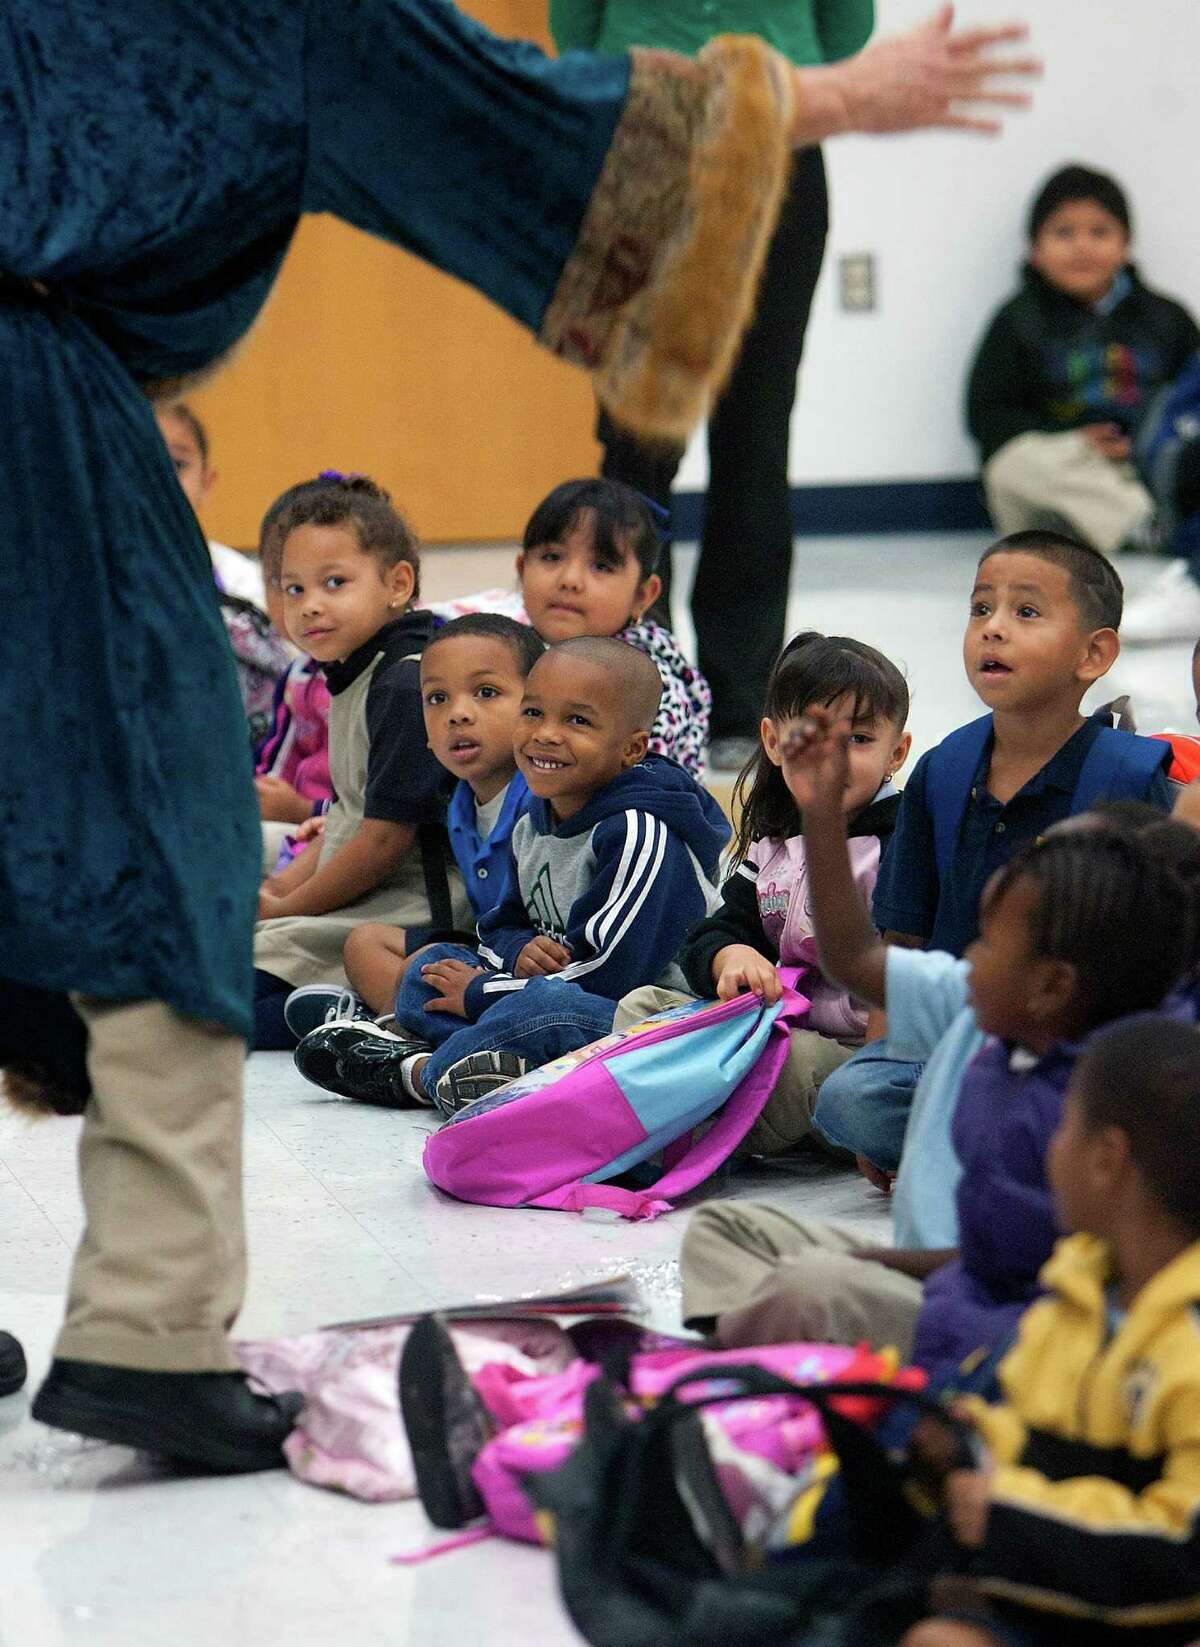 HISD has the opportunity to be a model for school systems working with "hyper-poor" populations.